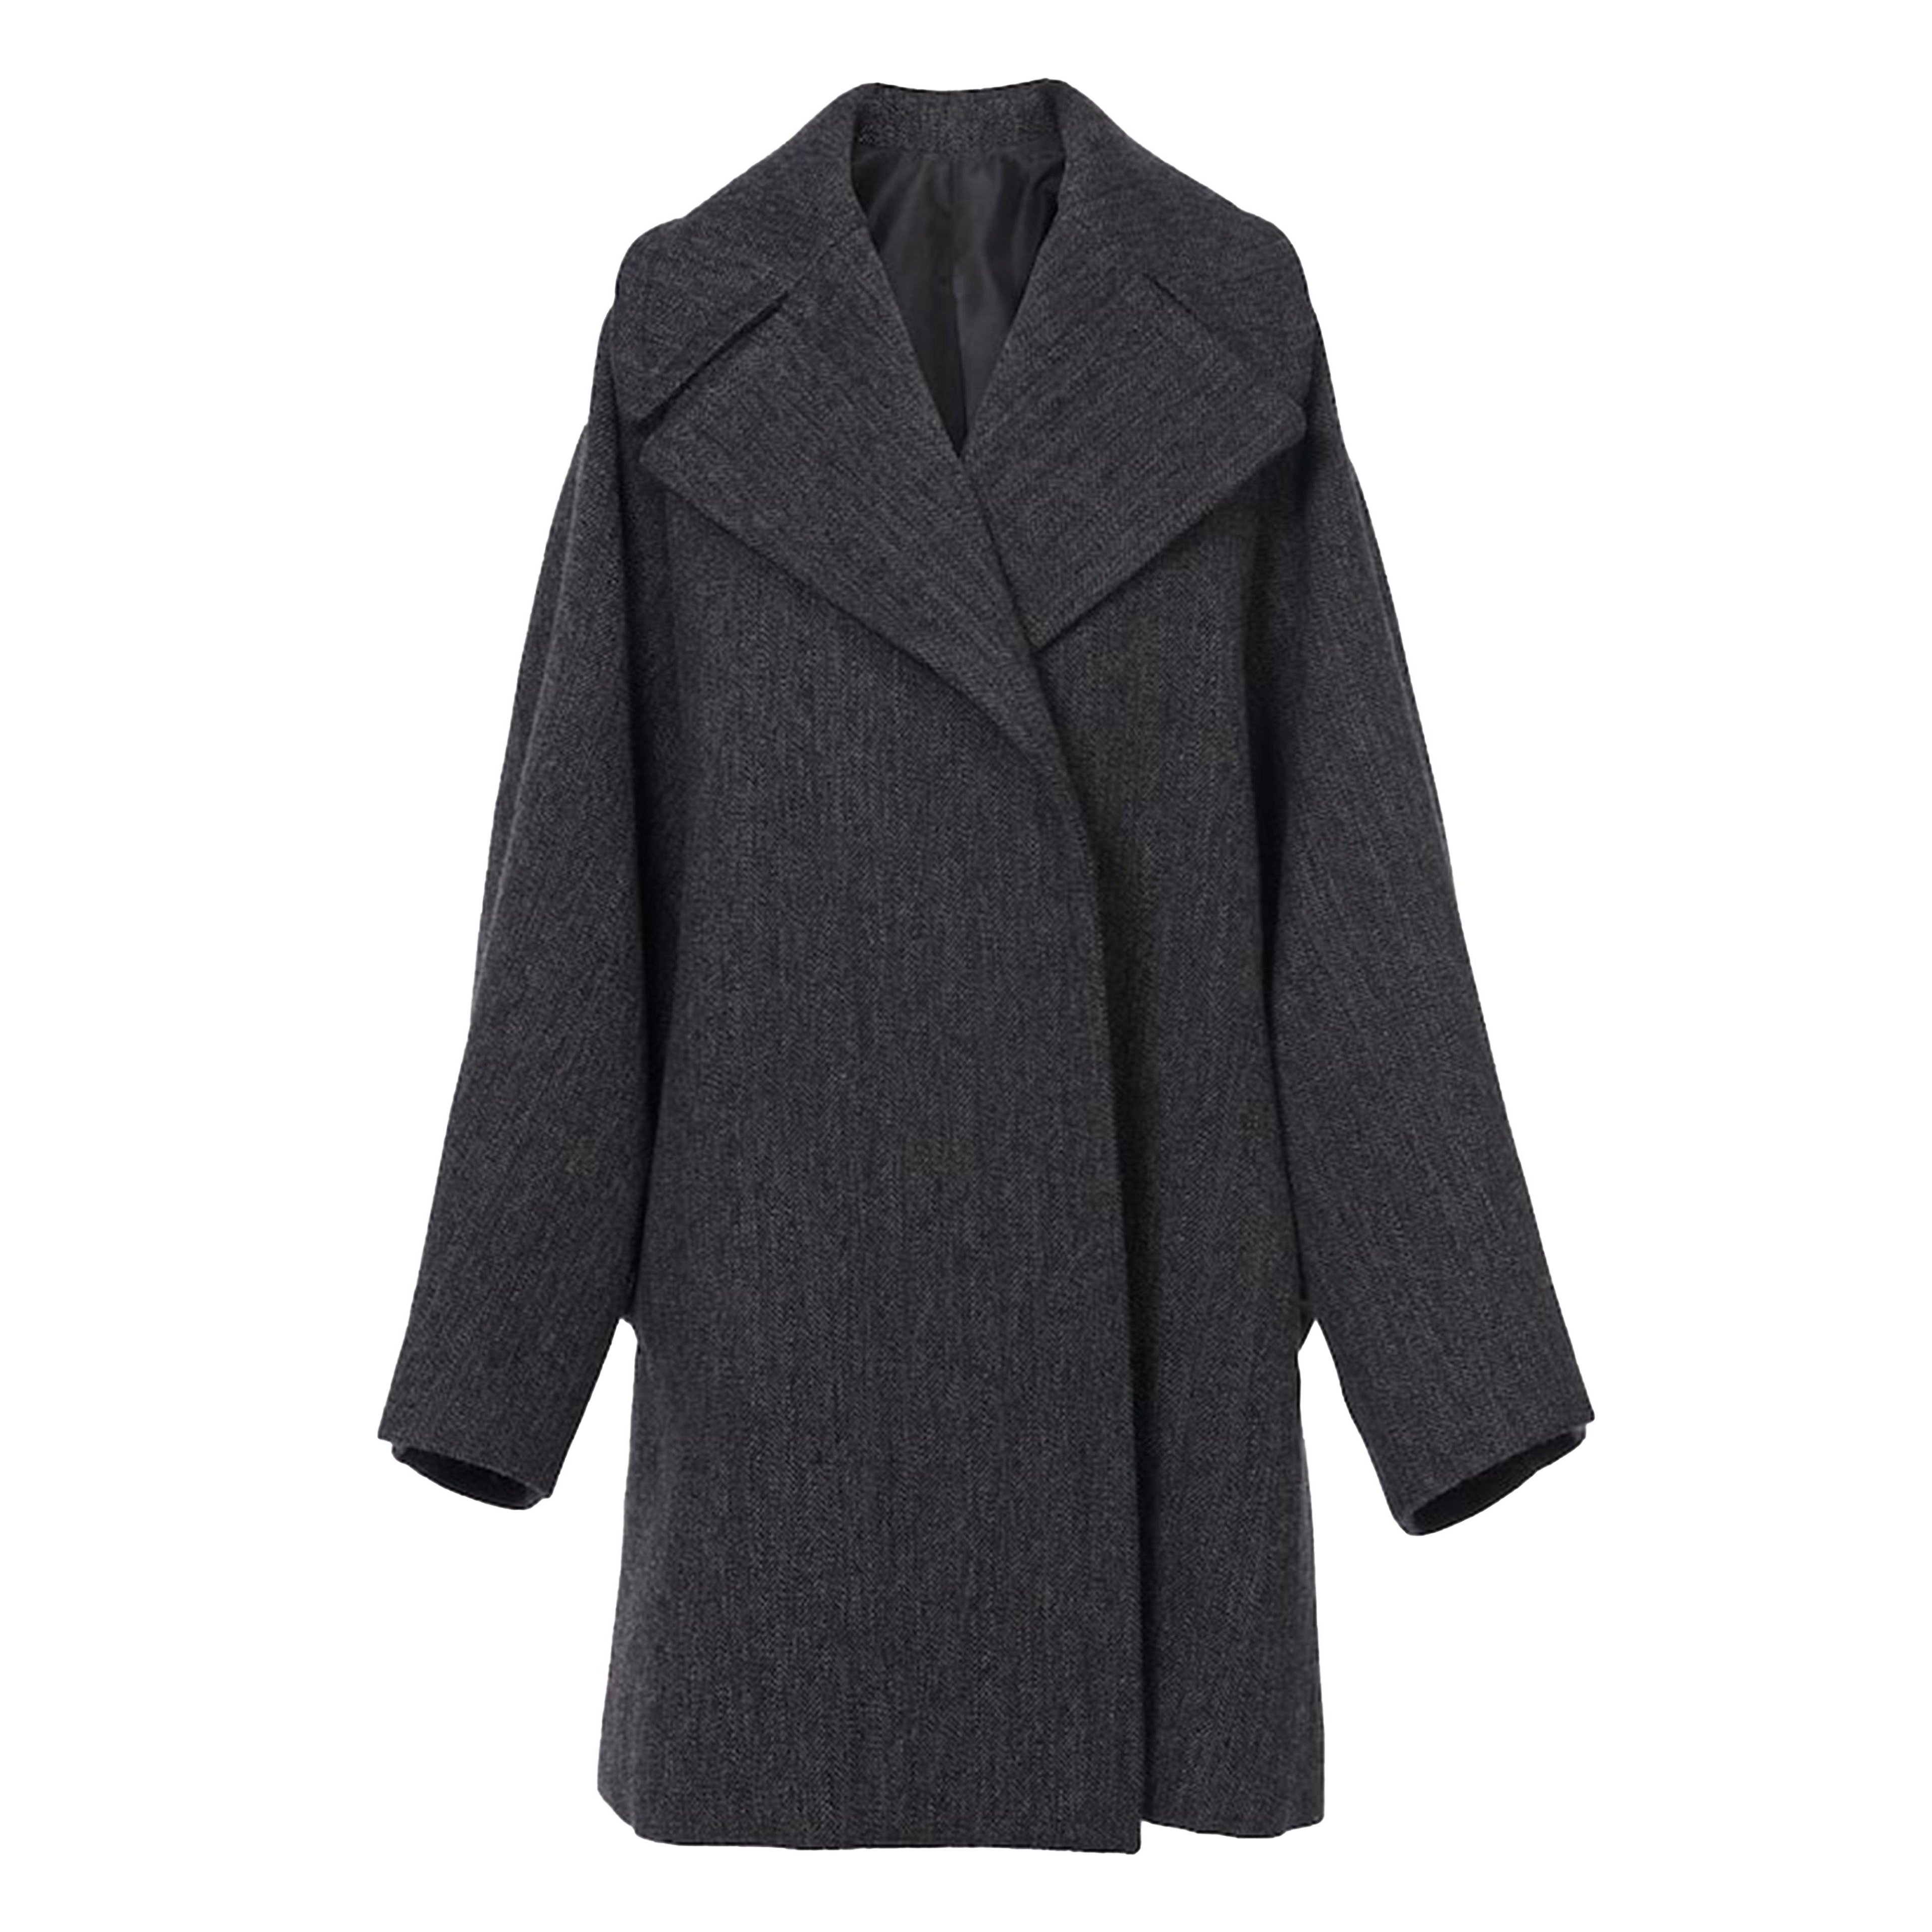 AlaÏa Oversized Belted Mid-Length Coat (Charcoal) by AZZEDINE ALAIA